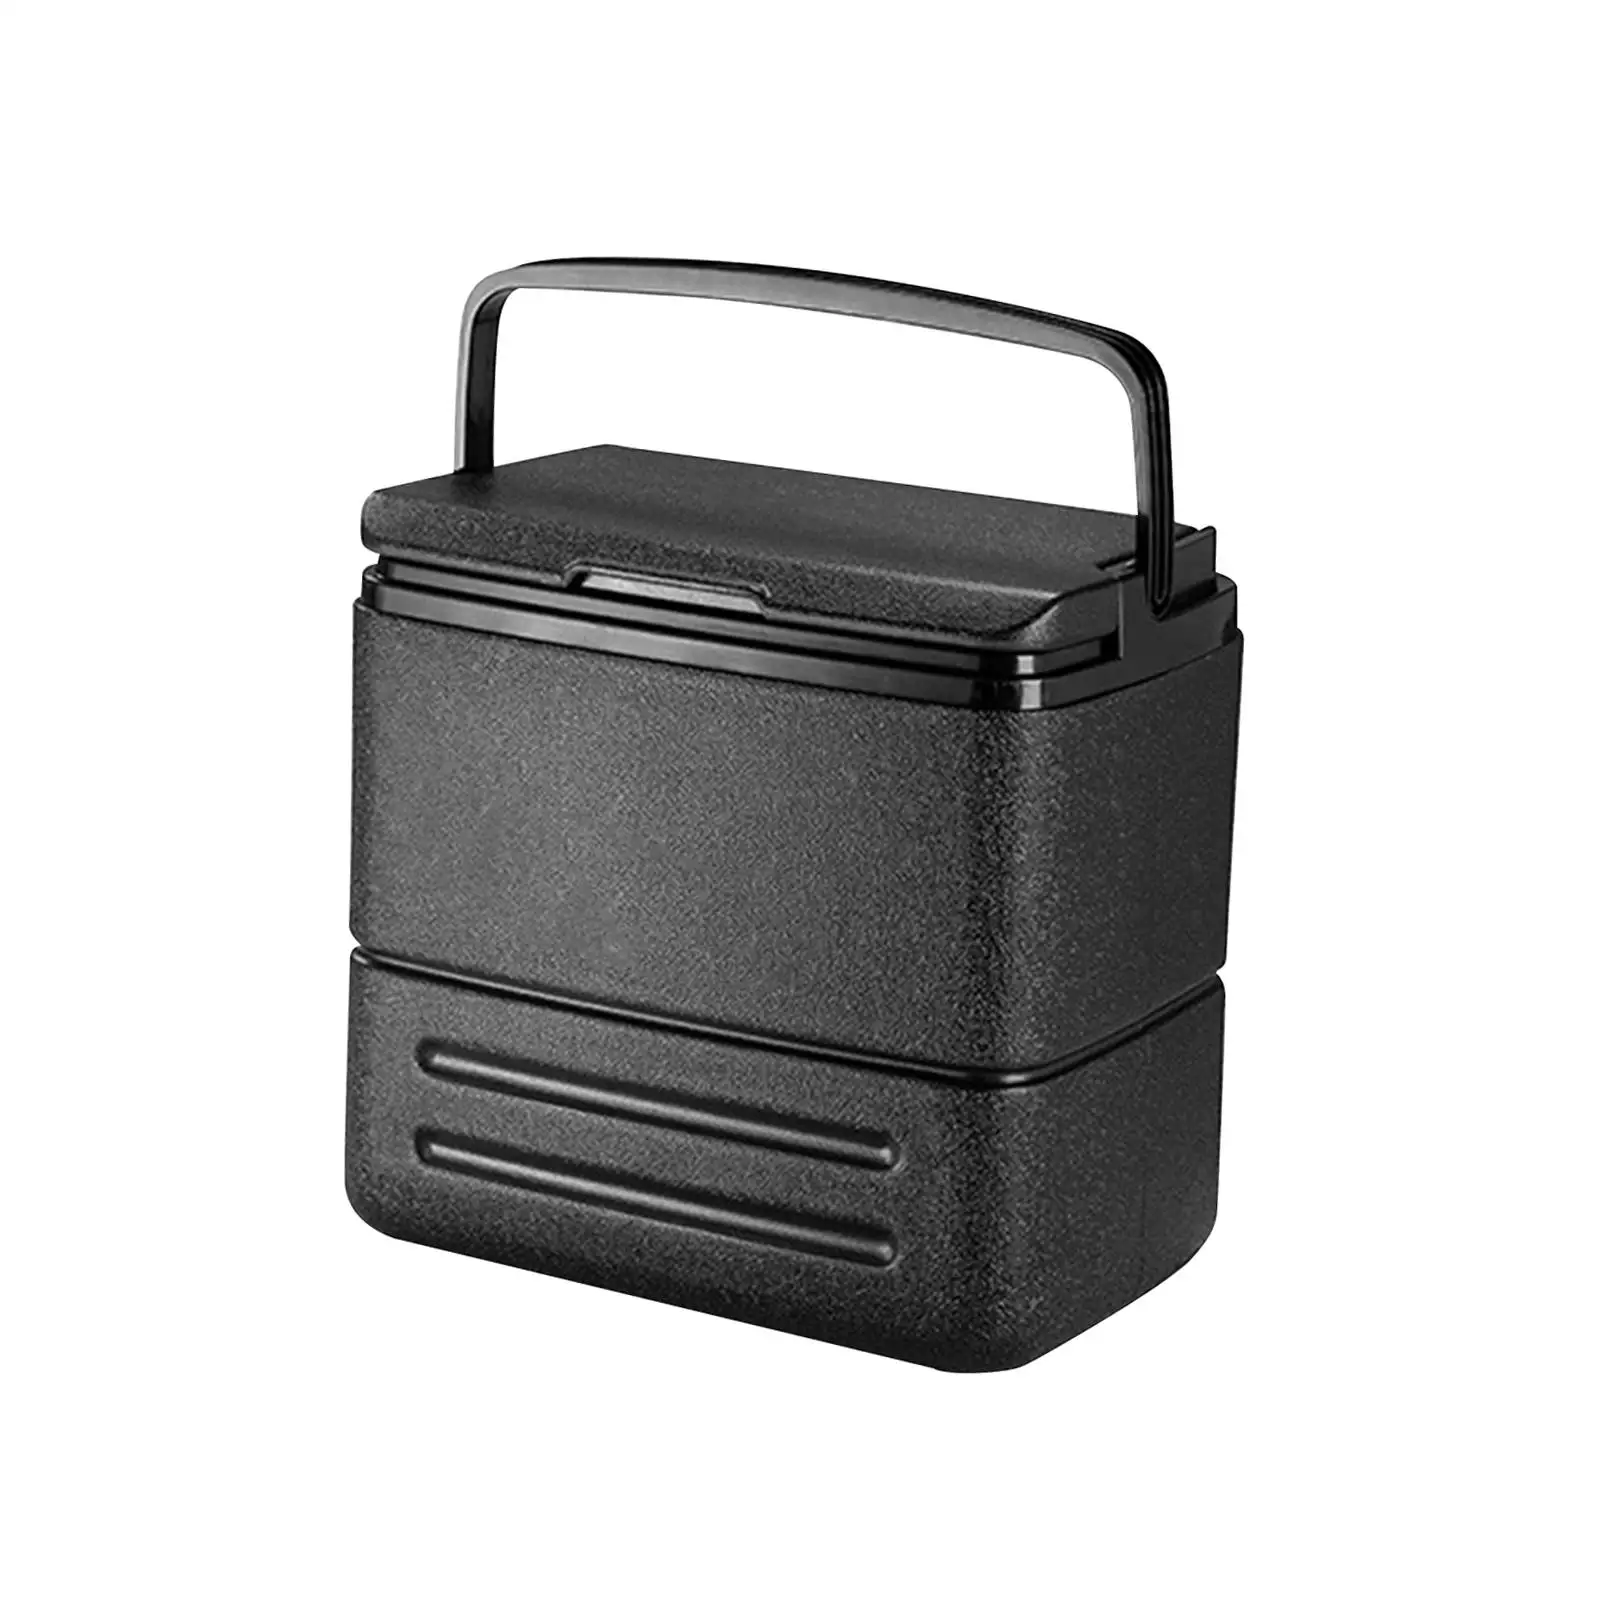 Portable Cooler Cool Box Insulated Cooler with Handle for Travel Picnic BBQ Beach